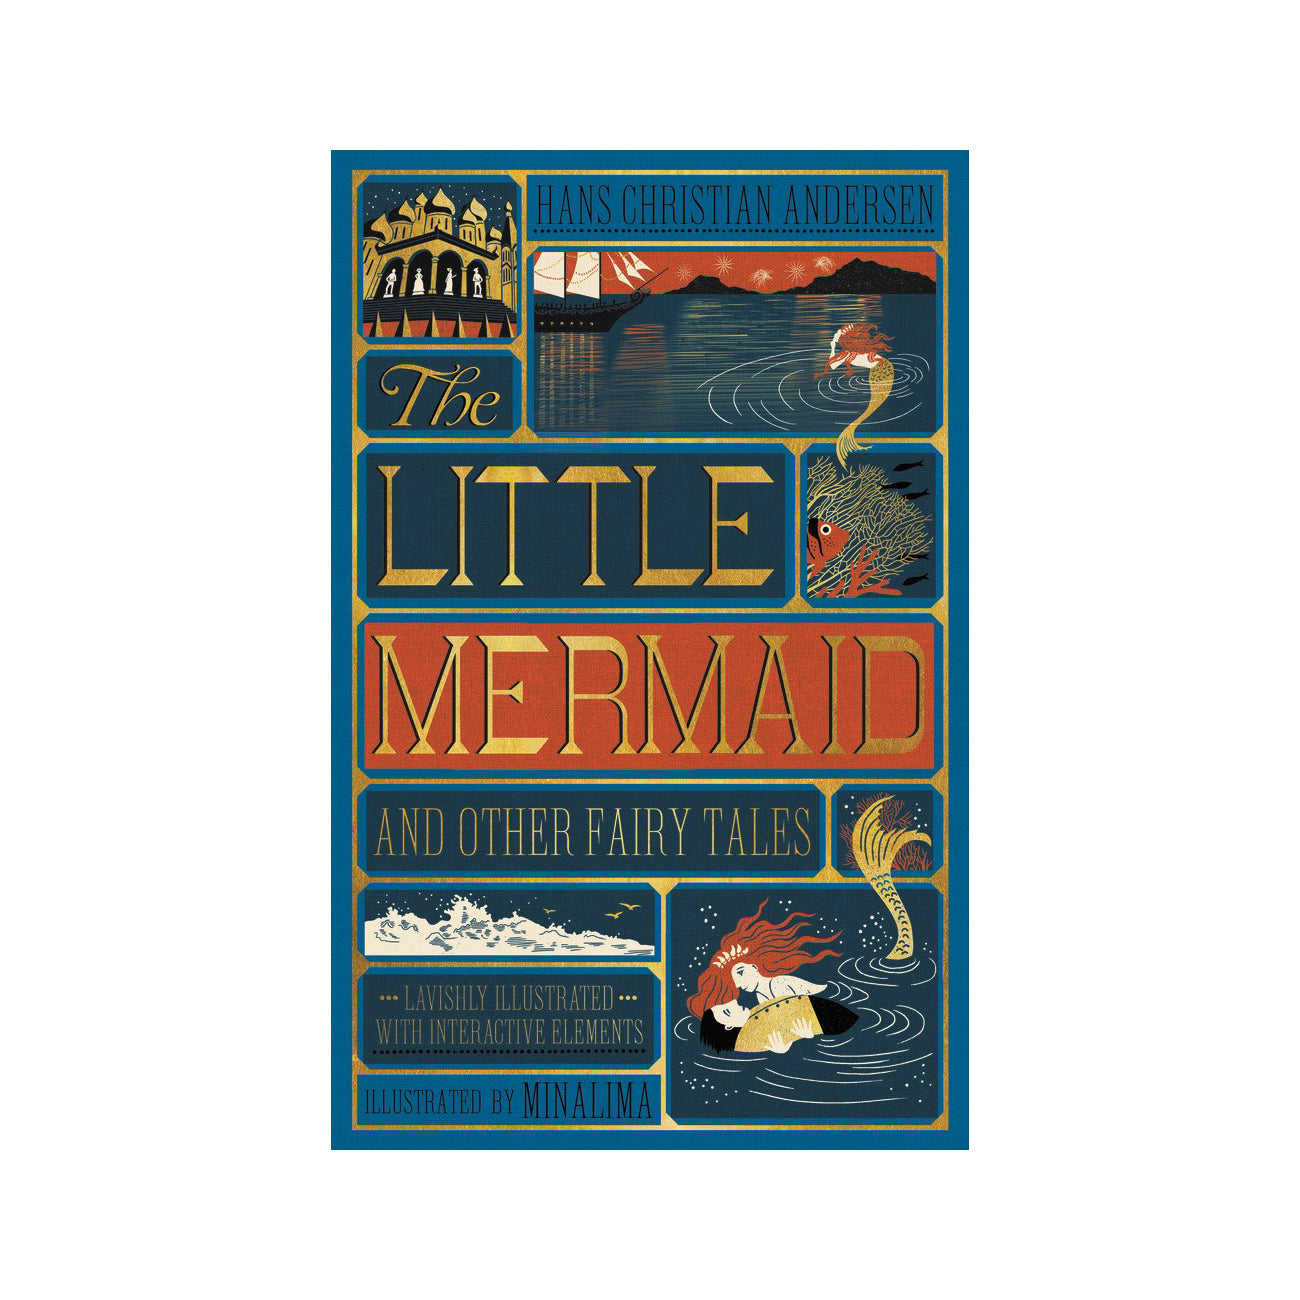 Little Mermaid and Other Fairytales